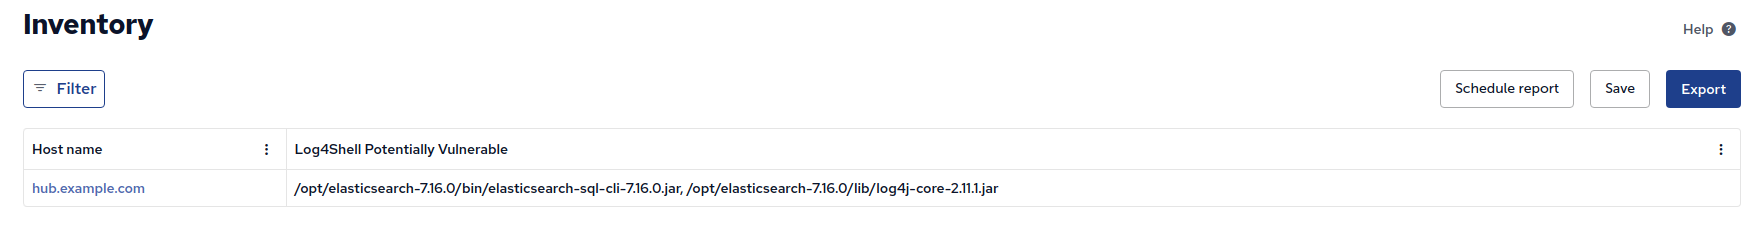 https://raw.githubusercontent.com/nickanderson/cfengine-security-hardening/master/cves/cve-2021-44228-log4j/inventory-Log4Shell_Potentially_Vulnerable.png